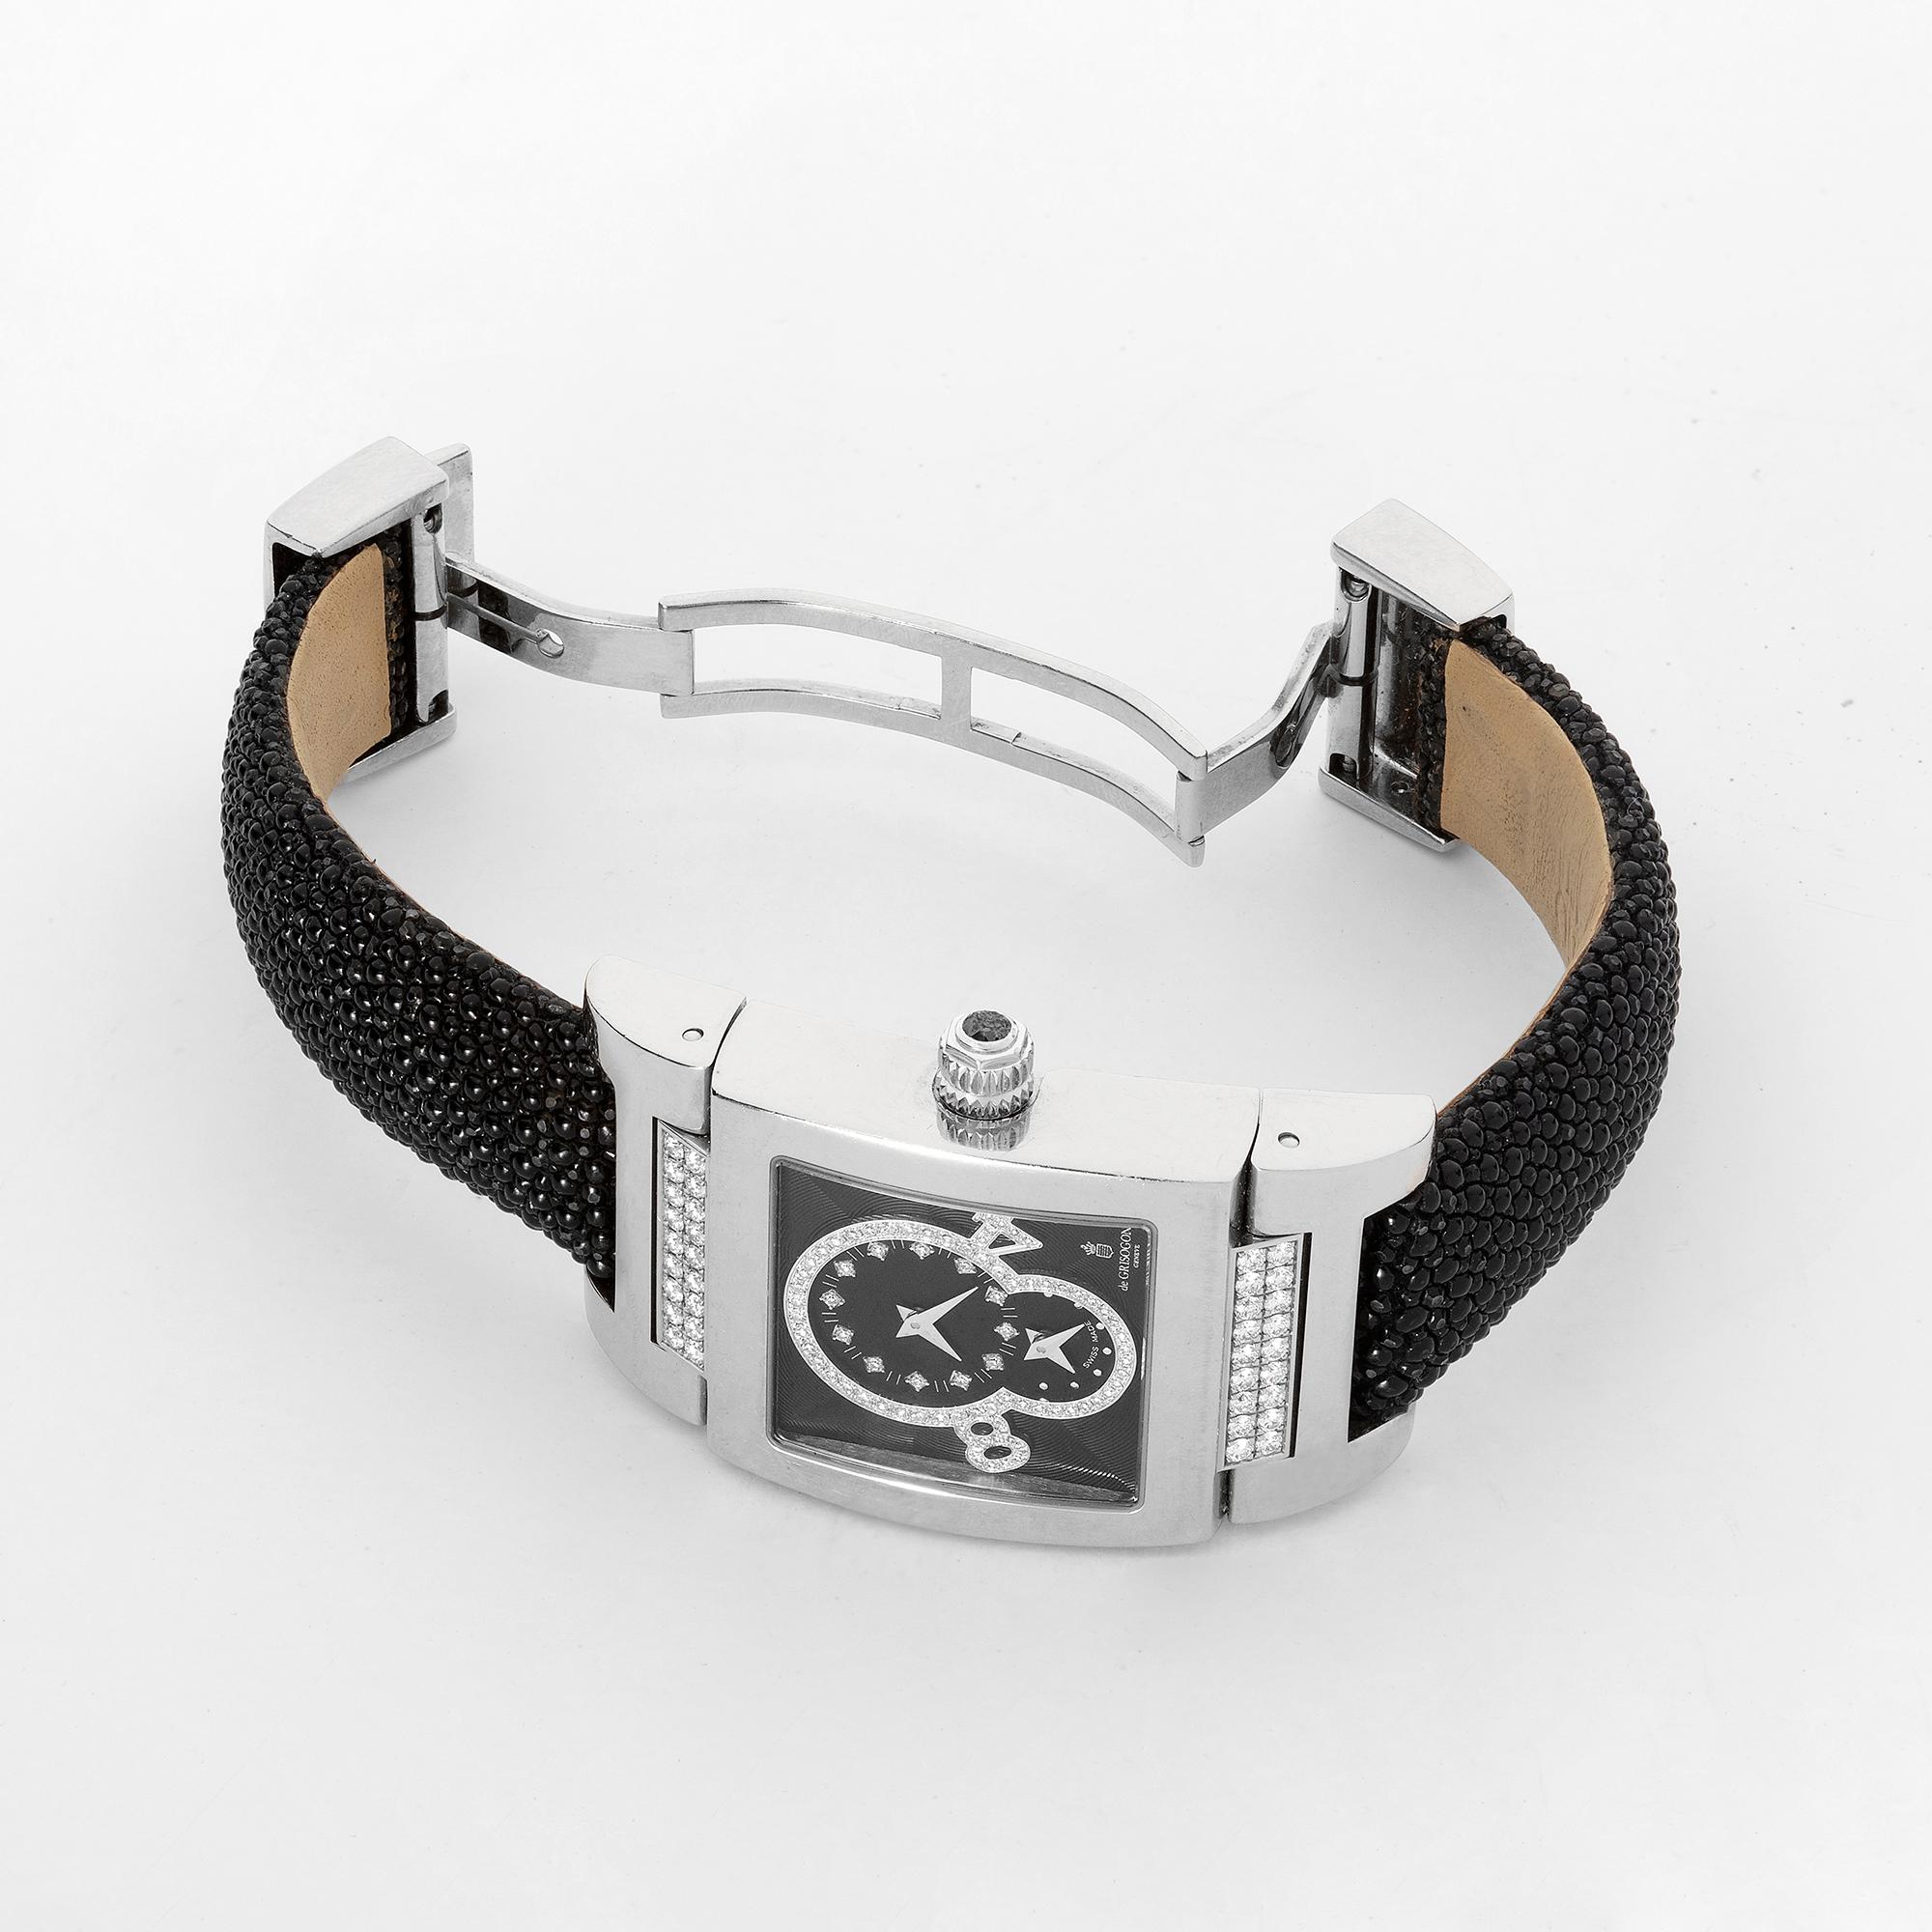 A unique piece from De Grisogono crafted in diamonds and white gold. 

* Exclusive, Swiss-made, 100% mechanic calibres, certified by the Poinçon de Genève.
* Architectural and Skeletonized movements
* Stingray leather bracelet 
* White gold with